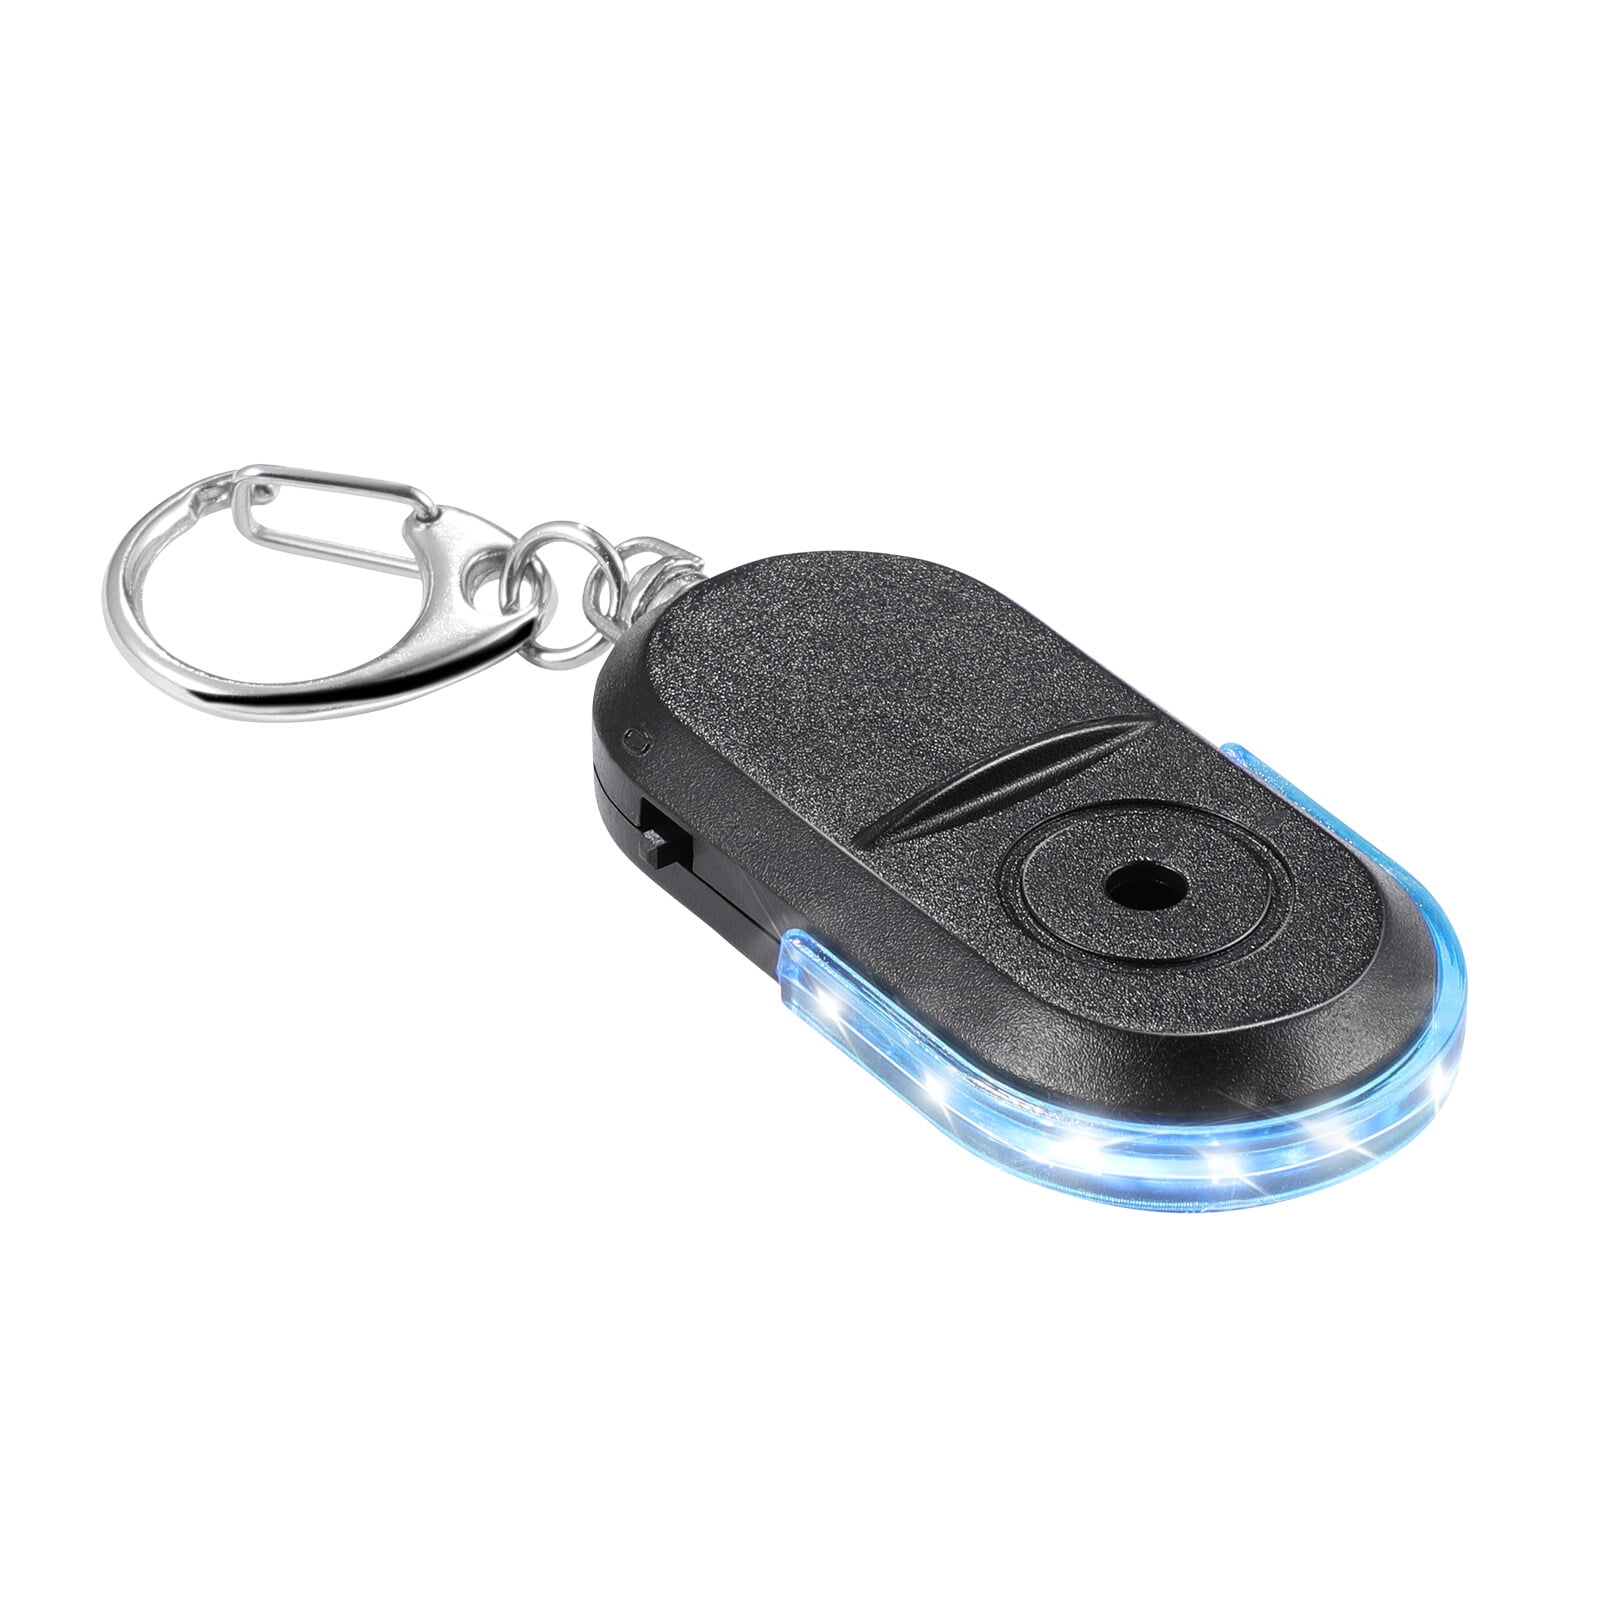 Whistle key finder – Fit Super-Humain